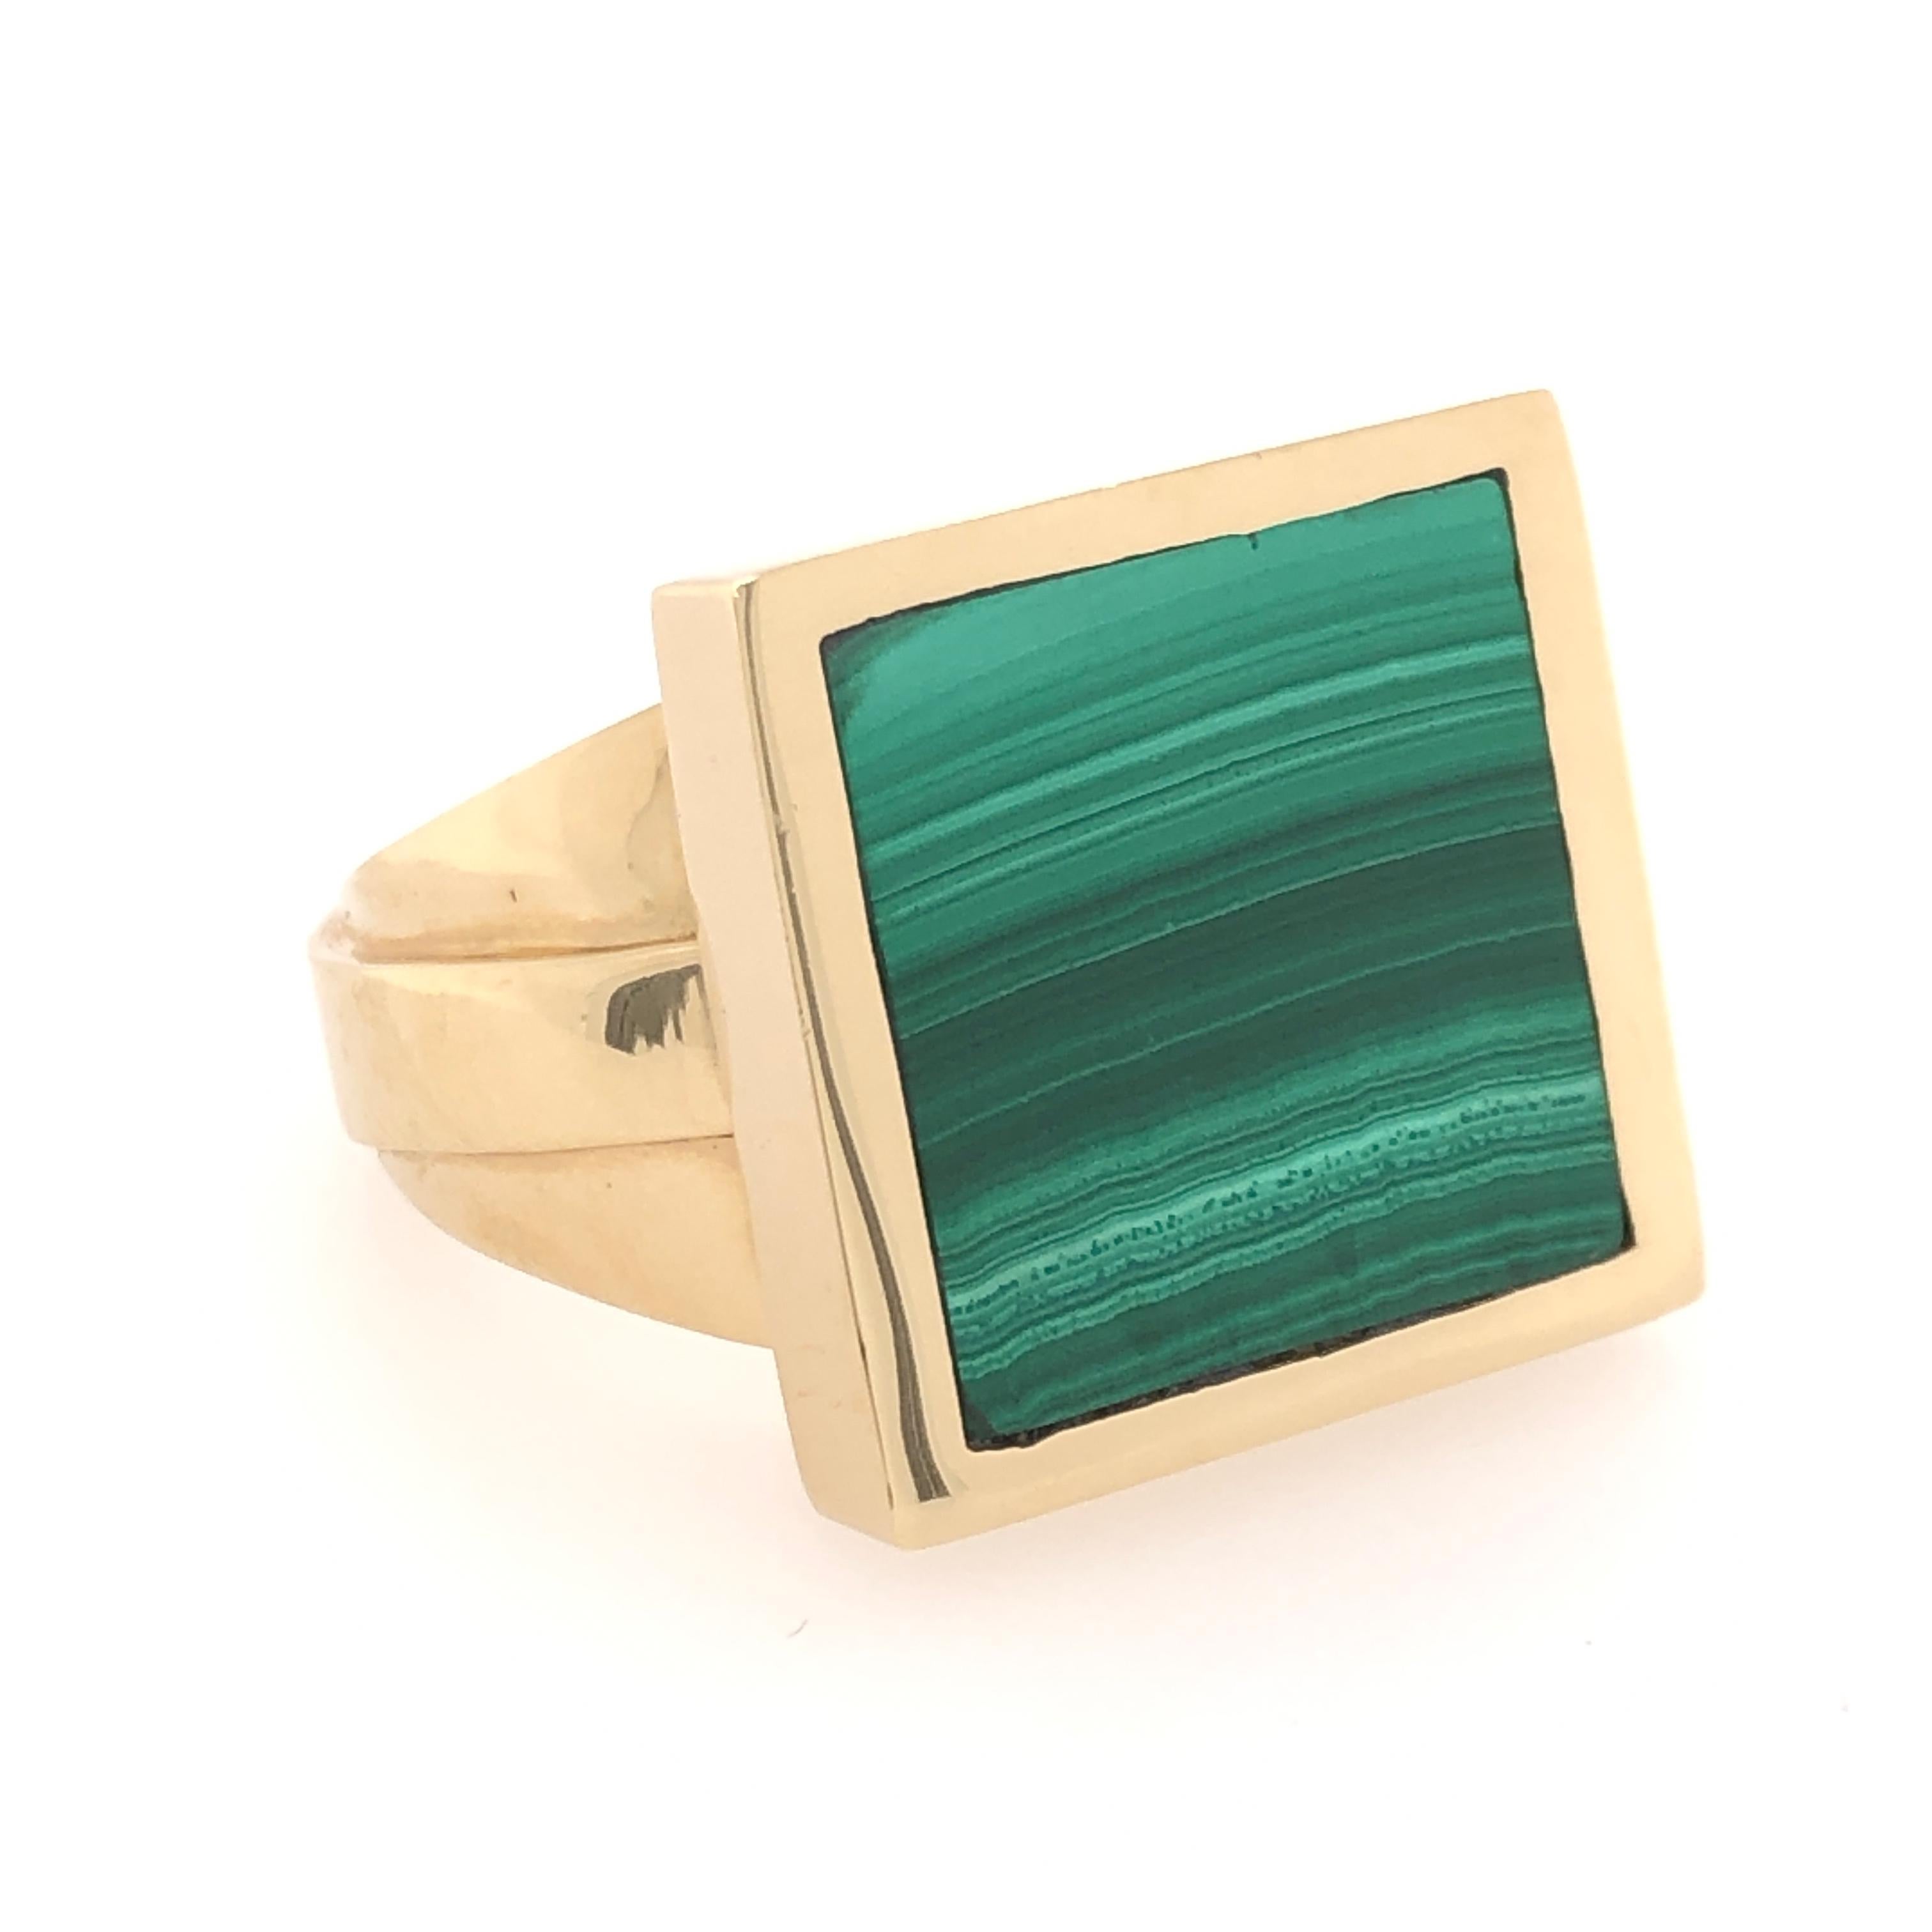 Gentlemen, if you like a little bit of color with the weight of a solid, study ring this 18 karat yellow gold malachite ring is for you. The varying green values in the natural striations of the this handsome stone compliment the angular design of